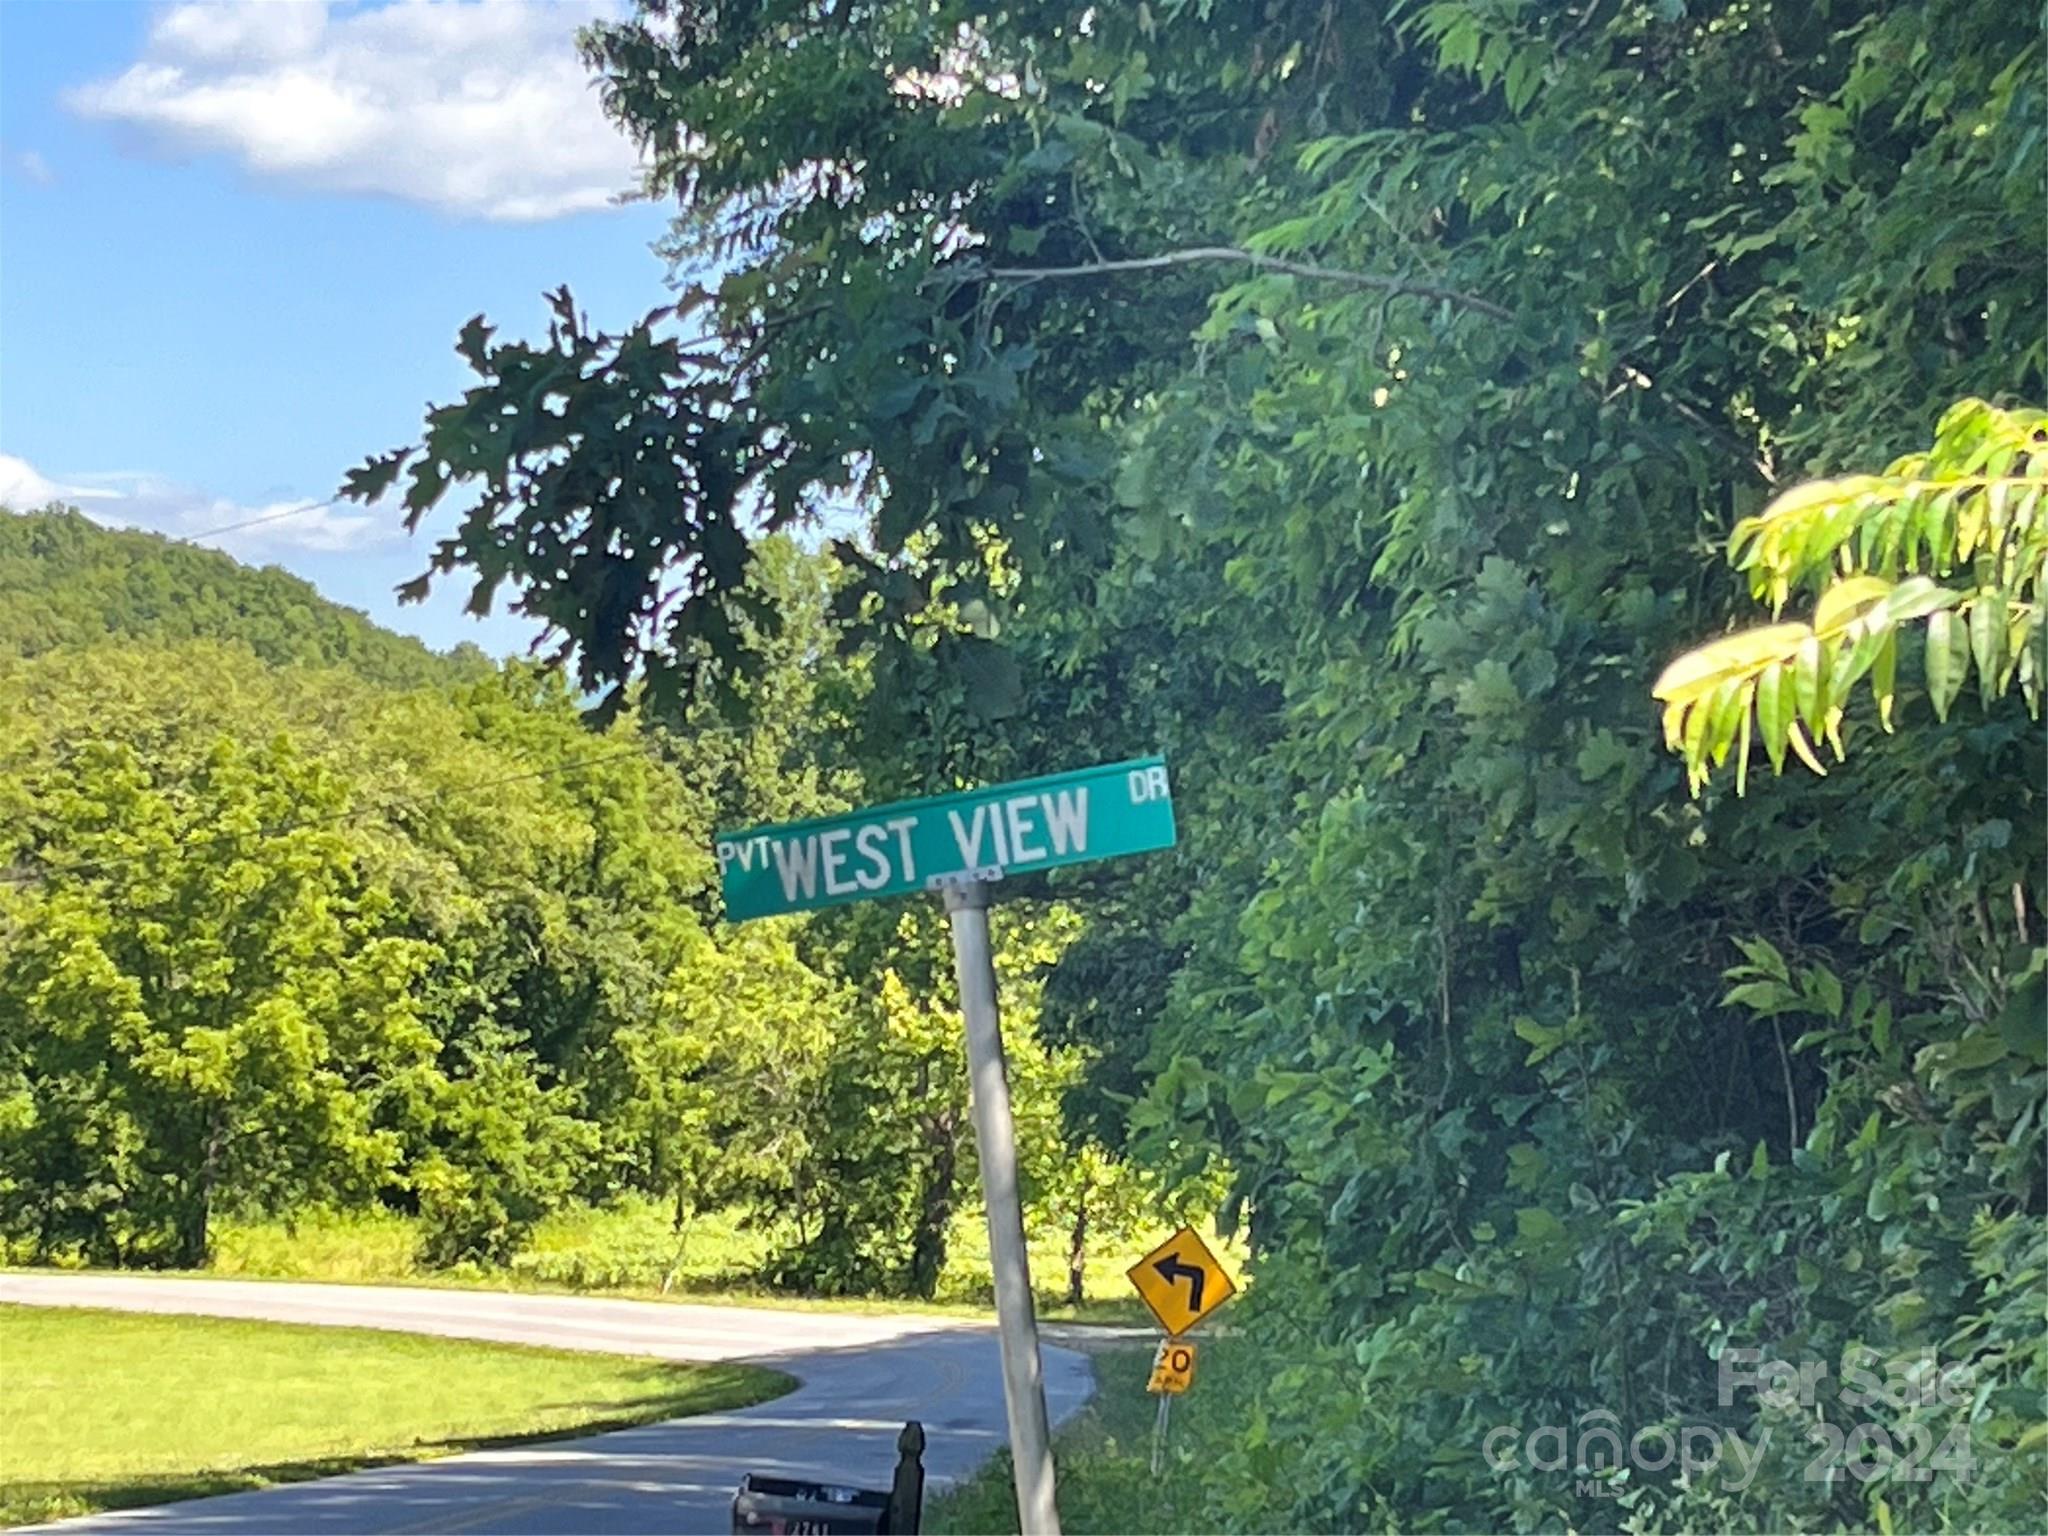 a street sign that is on a tree